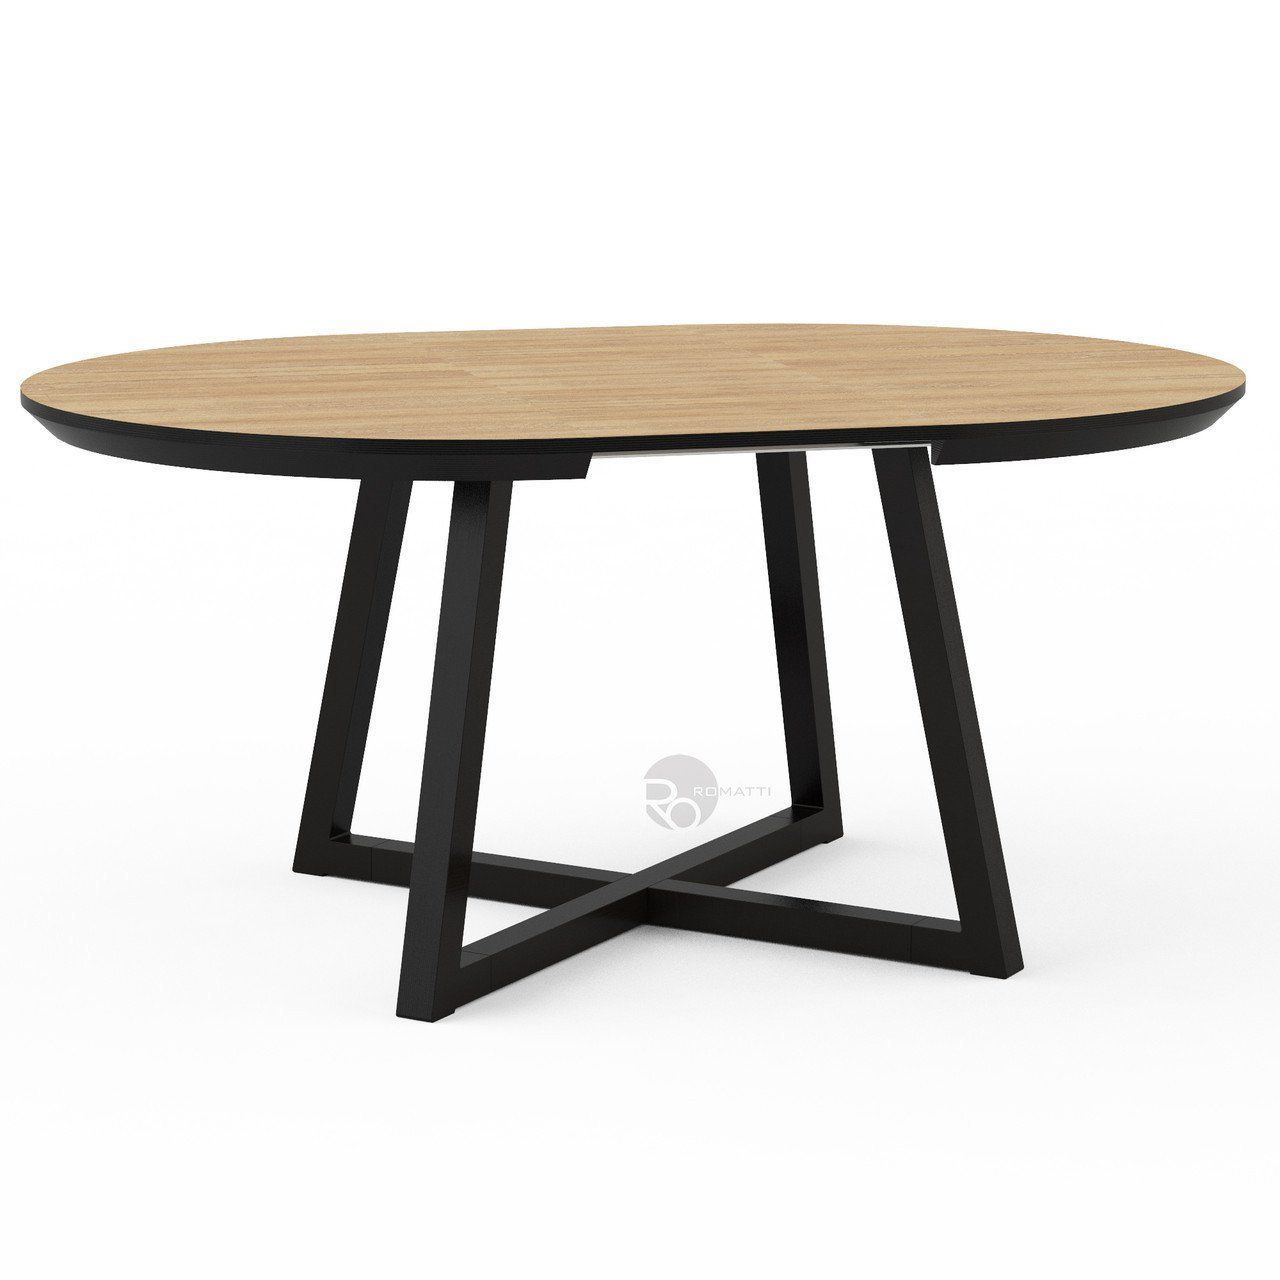 Anders by Romatti table